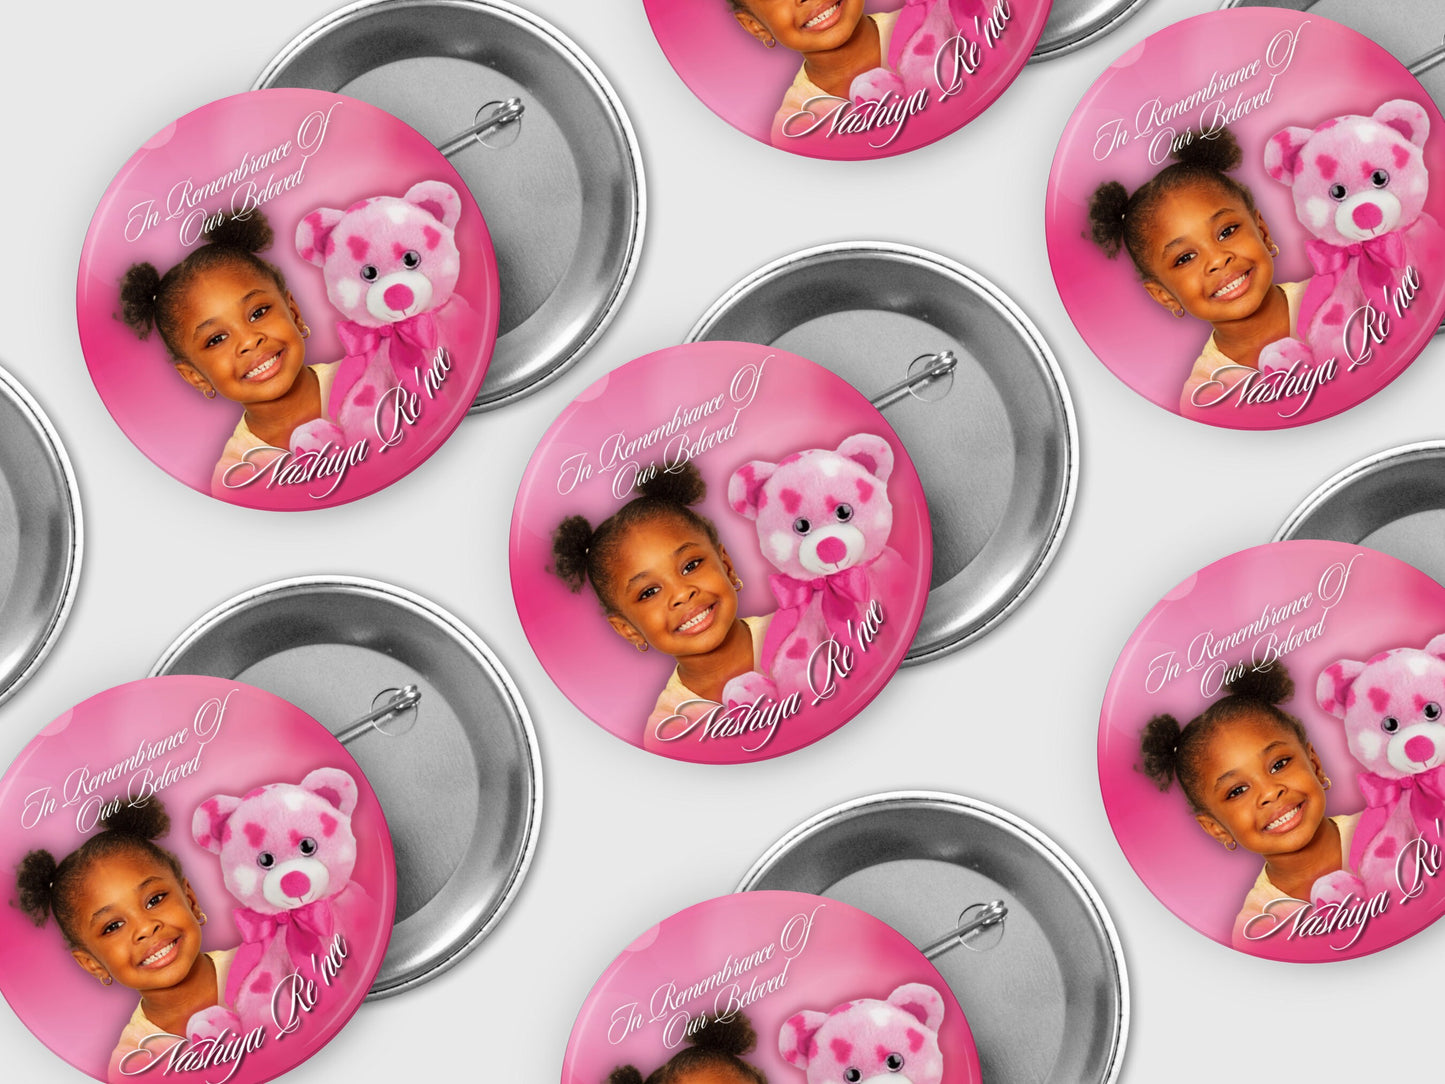 PINK PINBACK Template,Full Color| Personalized Funeral Buttons|Pinback Button Template|Keepsake Pin Backs Template